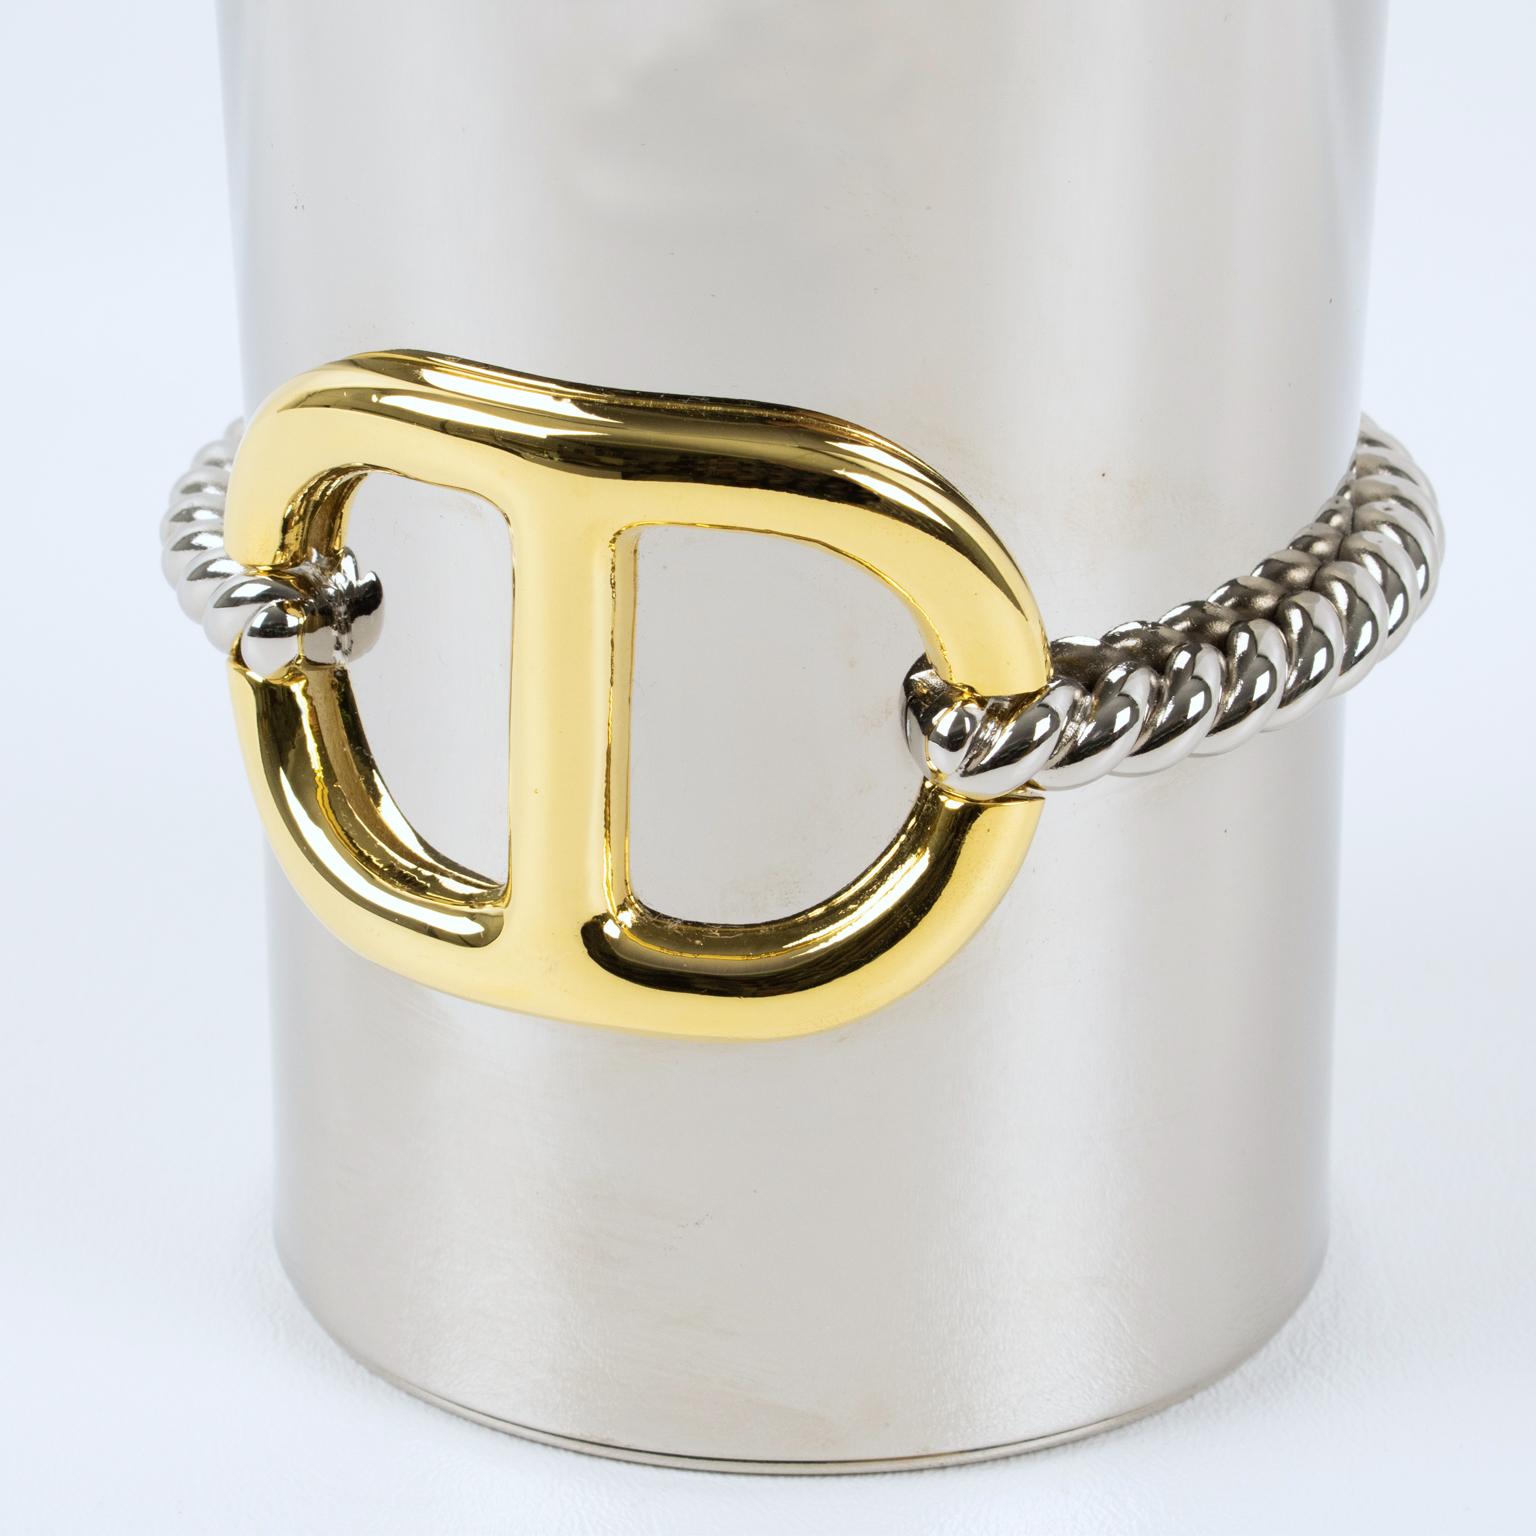 Late 20th Century Gucci Italy Silvered and Gilt Metal Barware Thermos Insulated Decanter with Rope